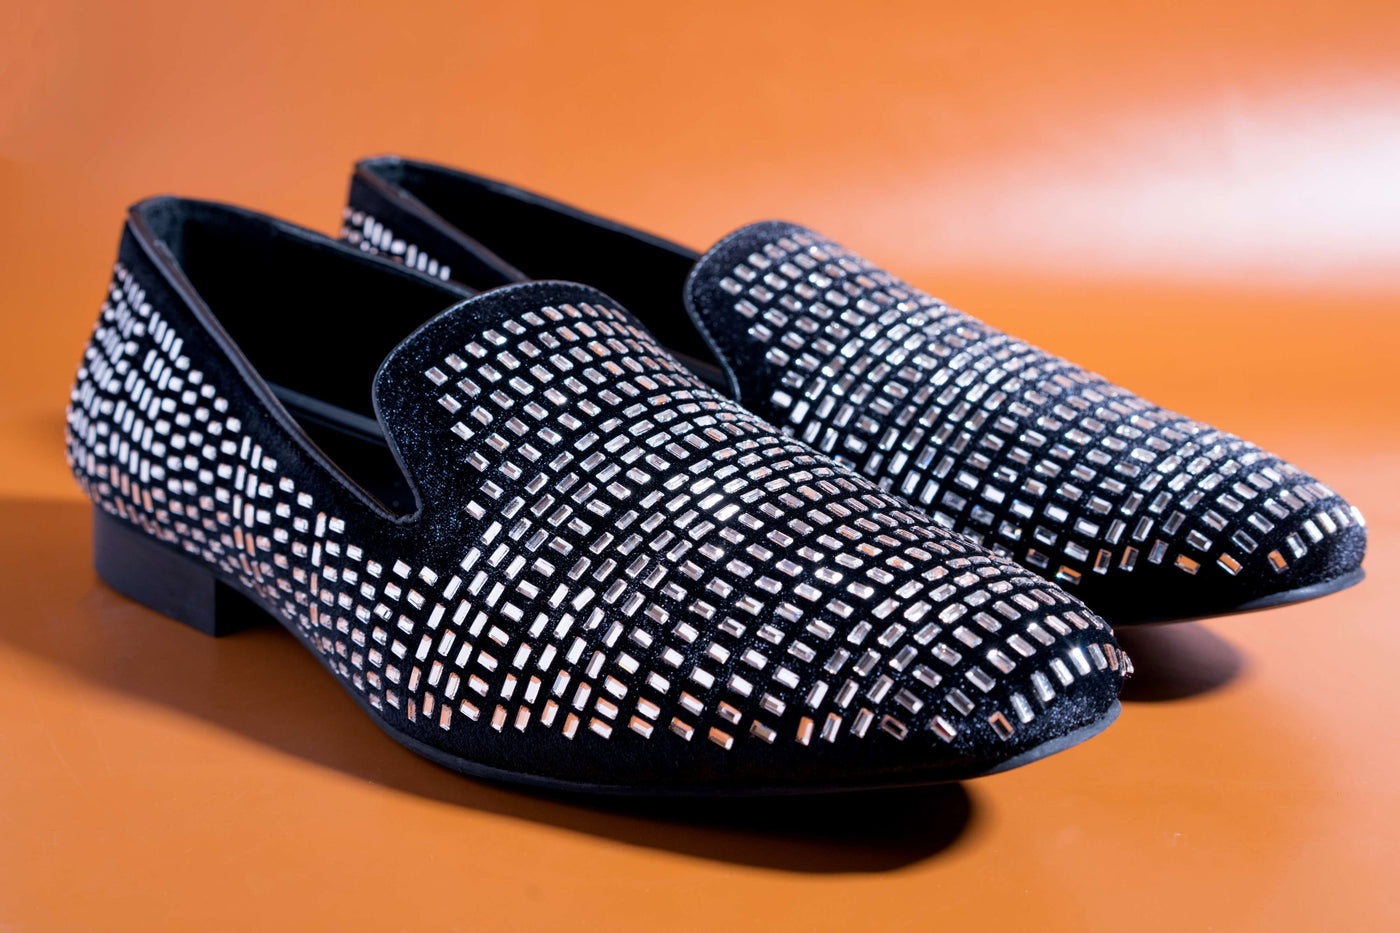 Stylish Men's Fashion Wedding Imported Studded Silver Moccasins High Quality Slip On Flat Loafer-Unique and Classy